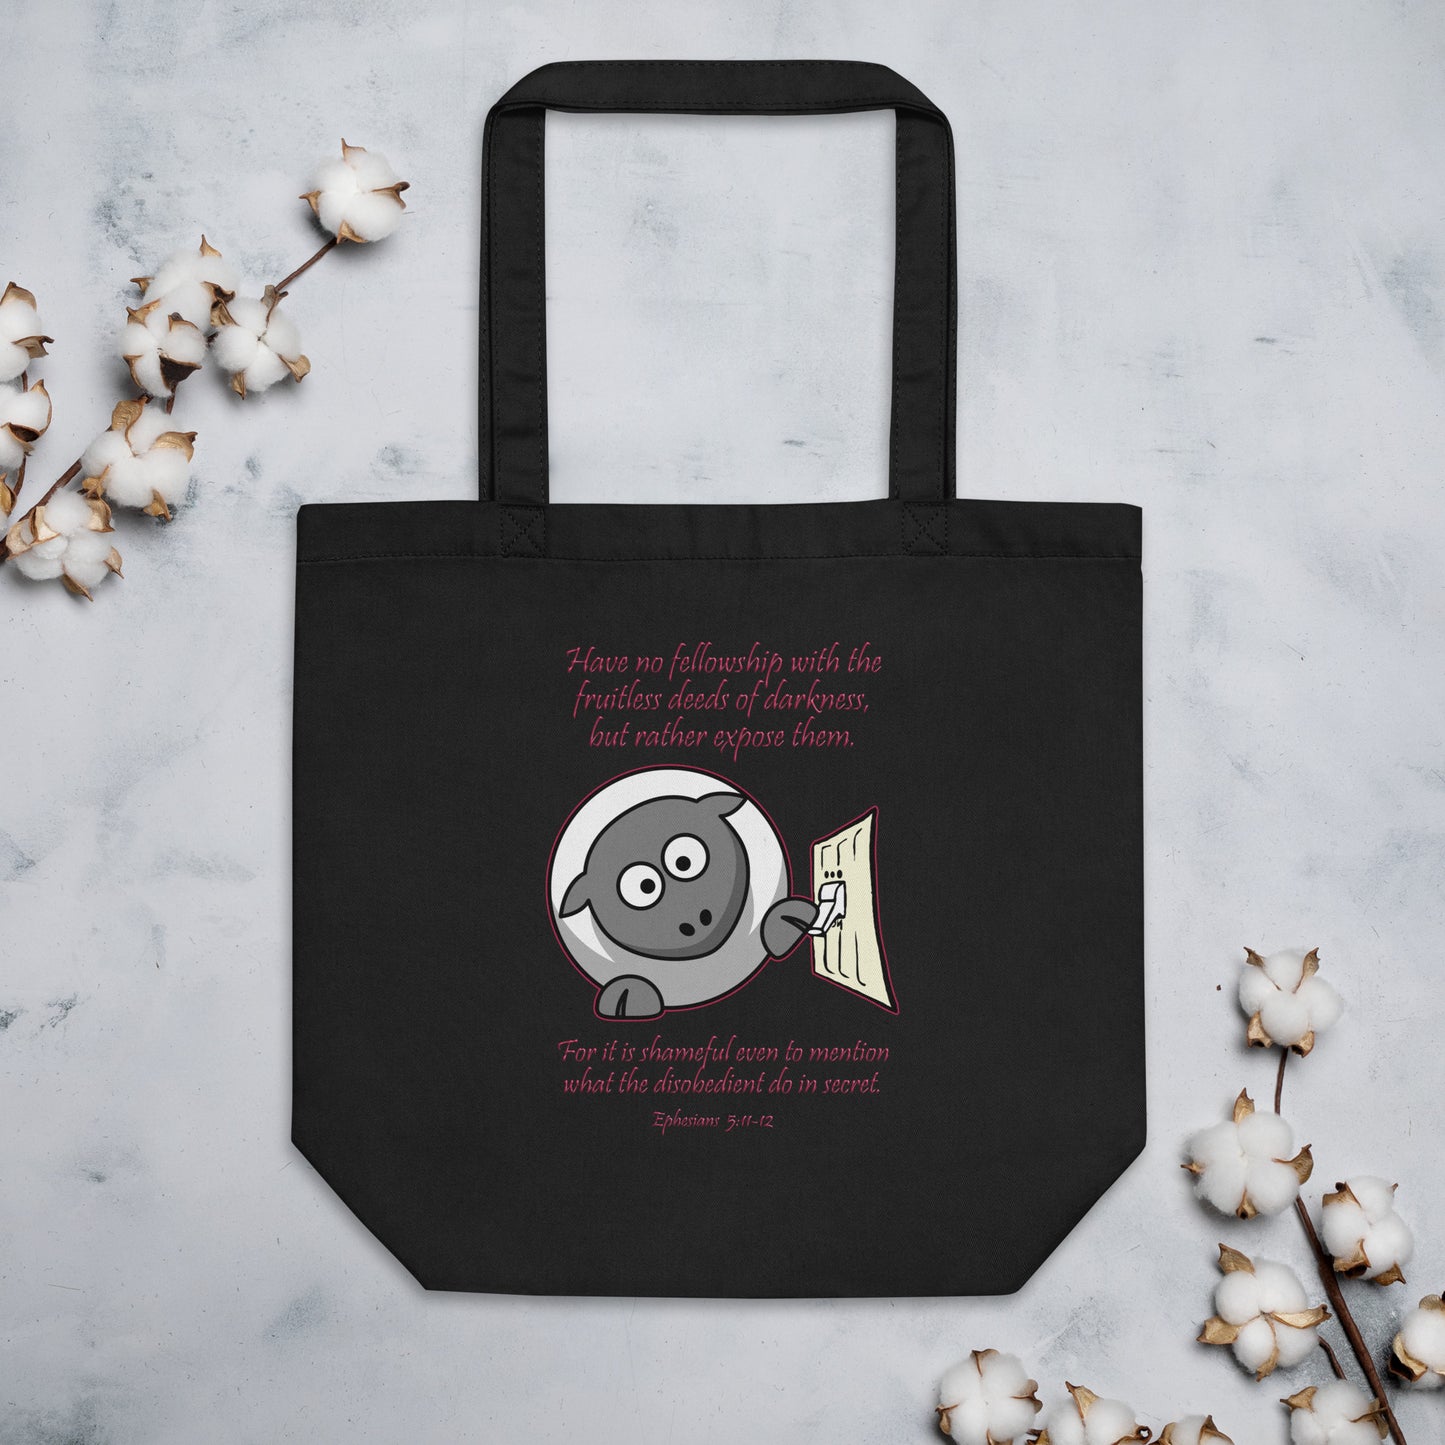 A011 Tote – Eco Tote Bag Featuring the Text of Ephesians 5v11-12 with a Sheep and Light Switch Graphic.